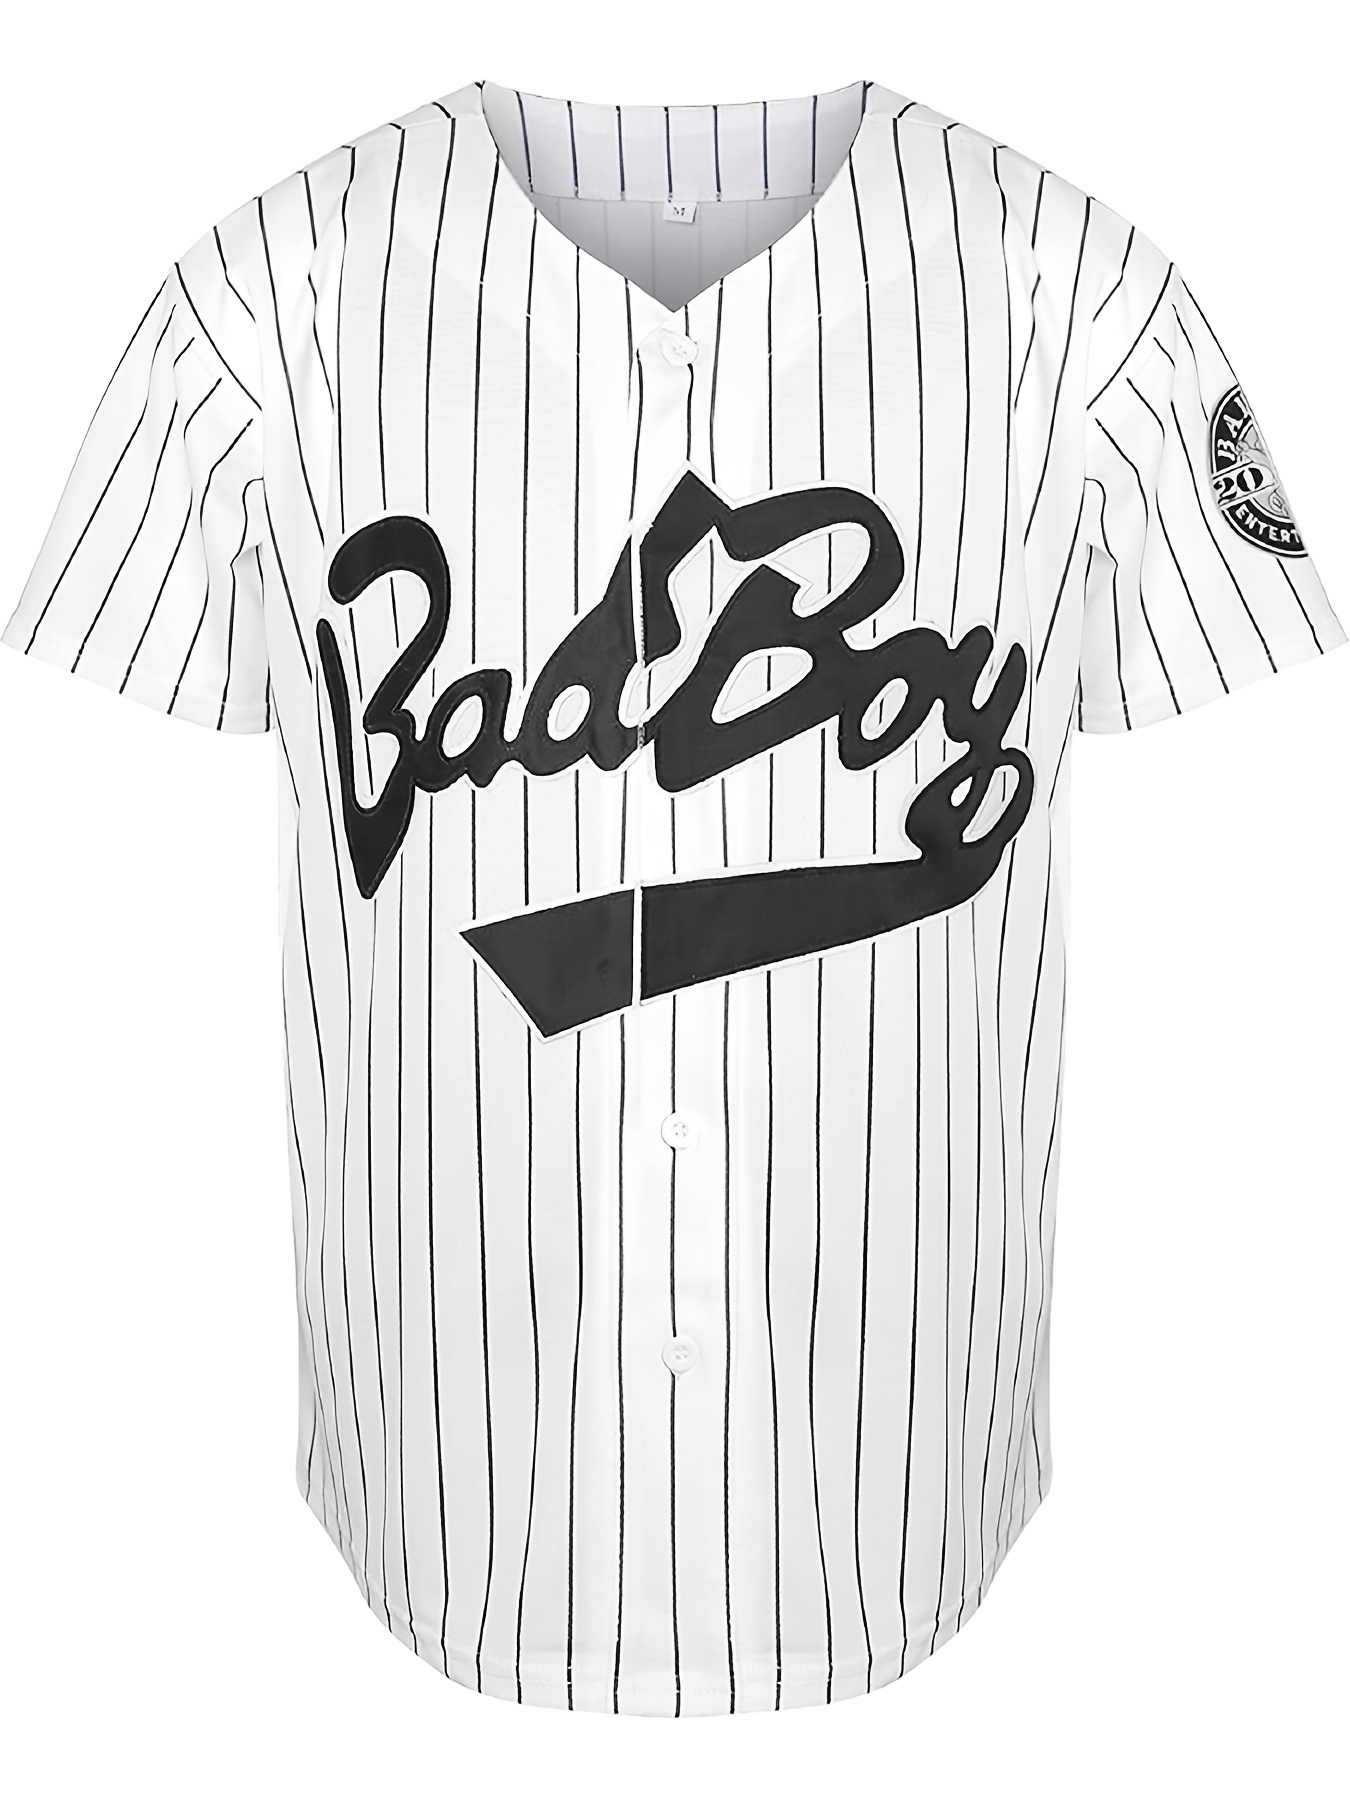 Smalls Jersey #10 Short Sleeves 90s Hip Hop Clothing Stitched Movie Baseball  Jersey